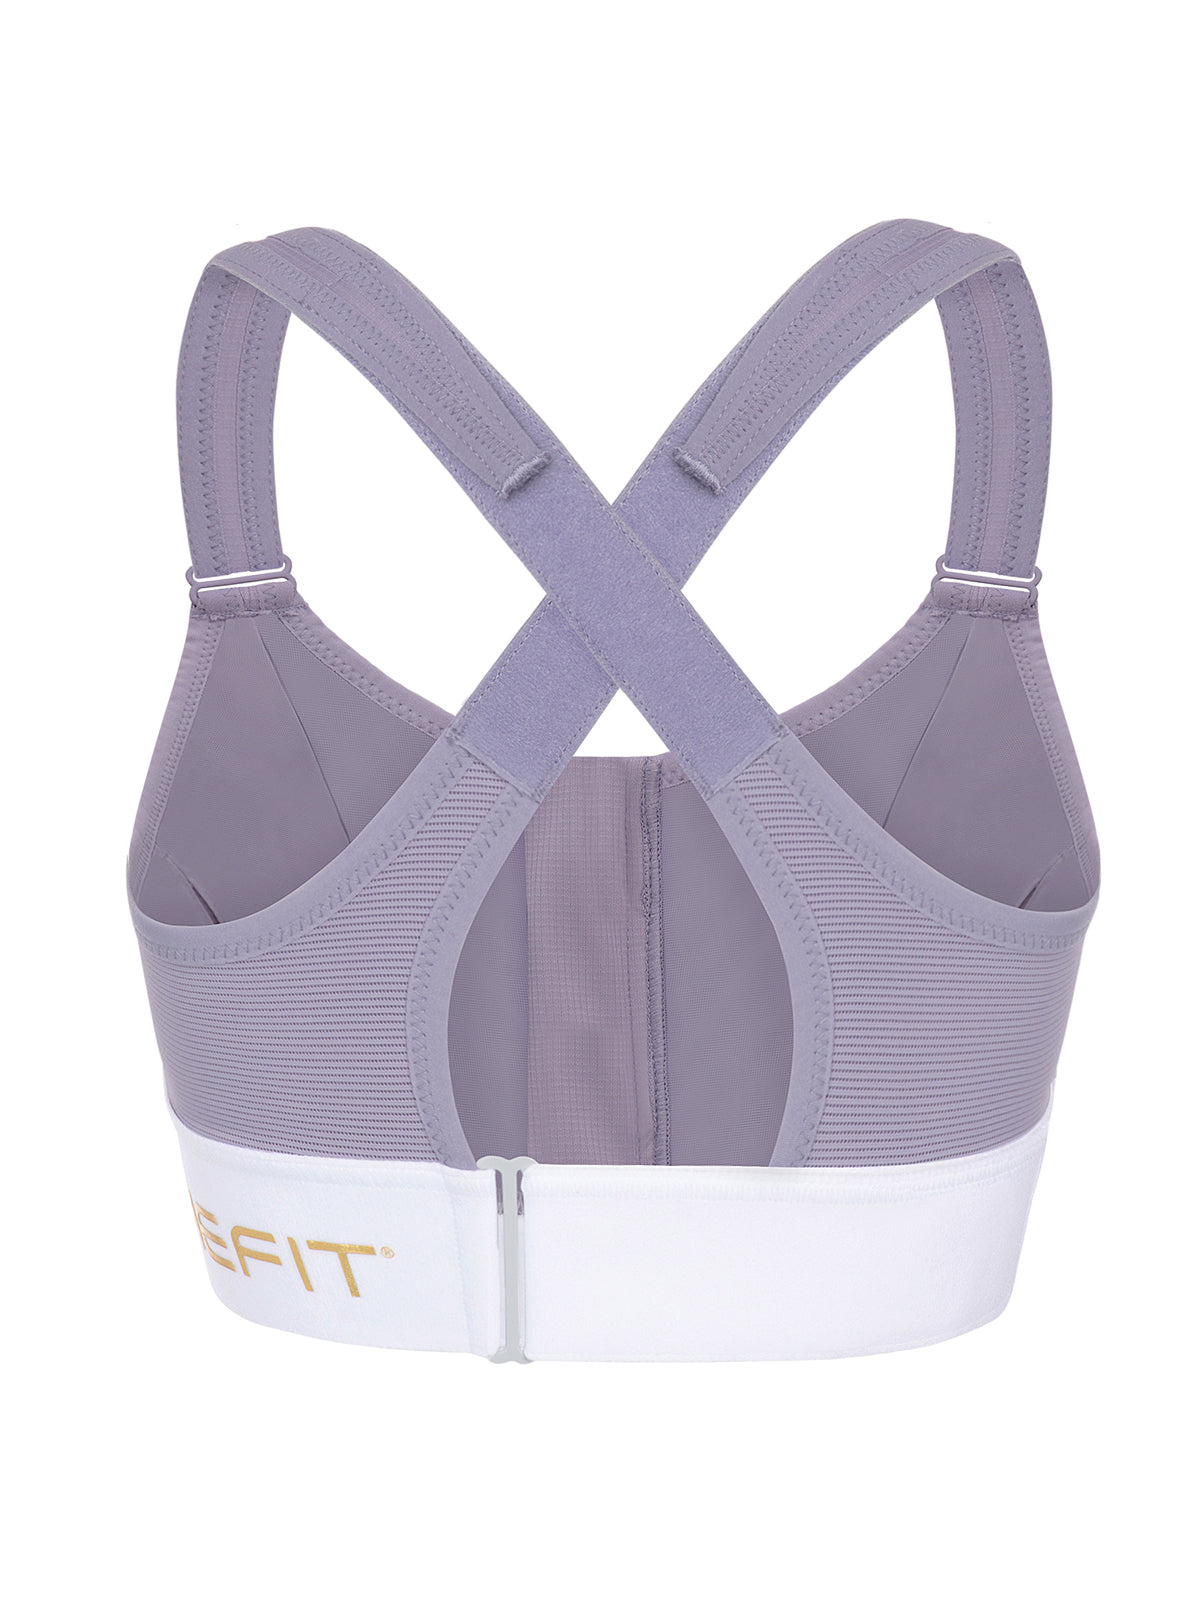 Shefit Ultimate Sports Bra Size 6 Luxe High Impact Victorious Style 110002